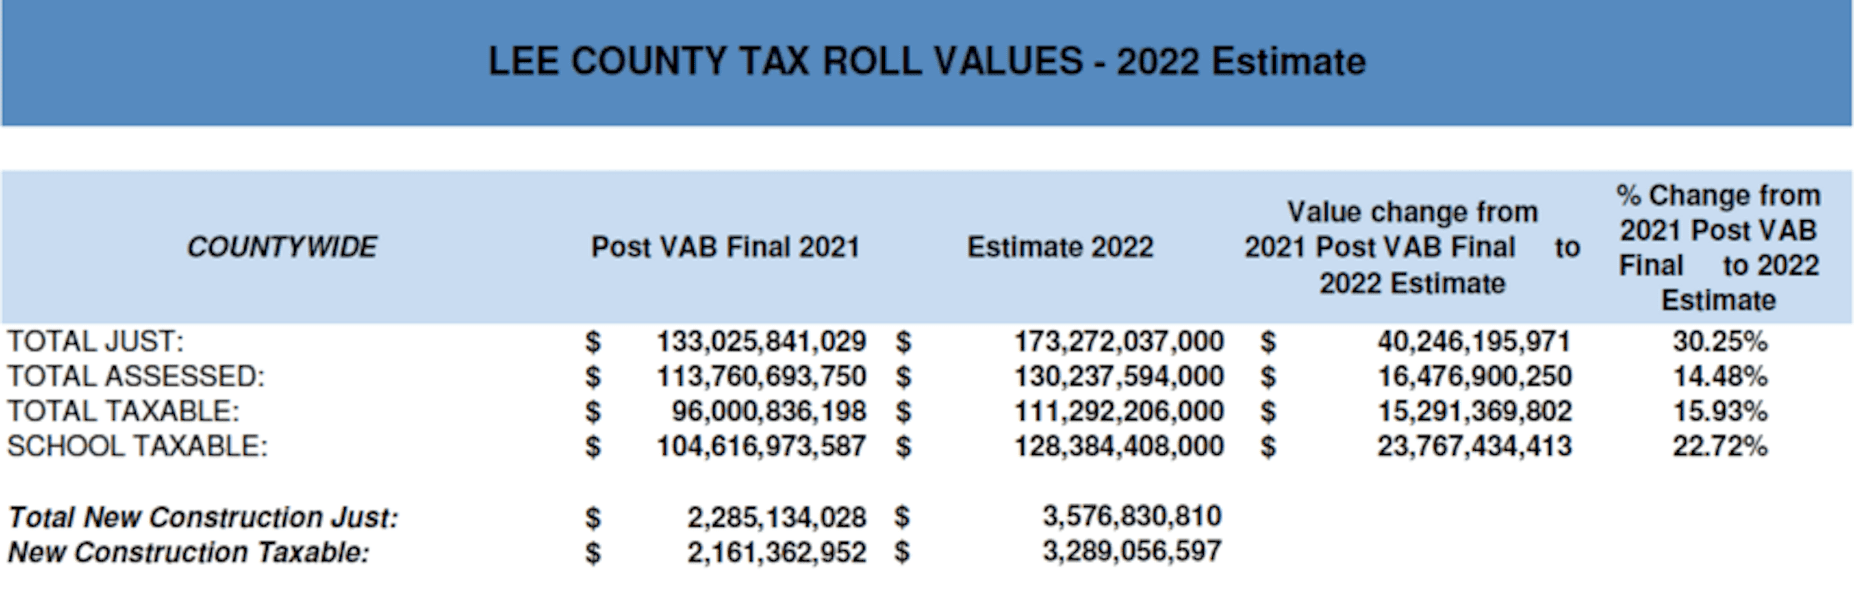 Lee County Tax Roll Values 